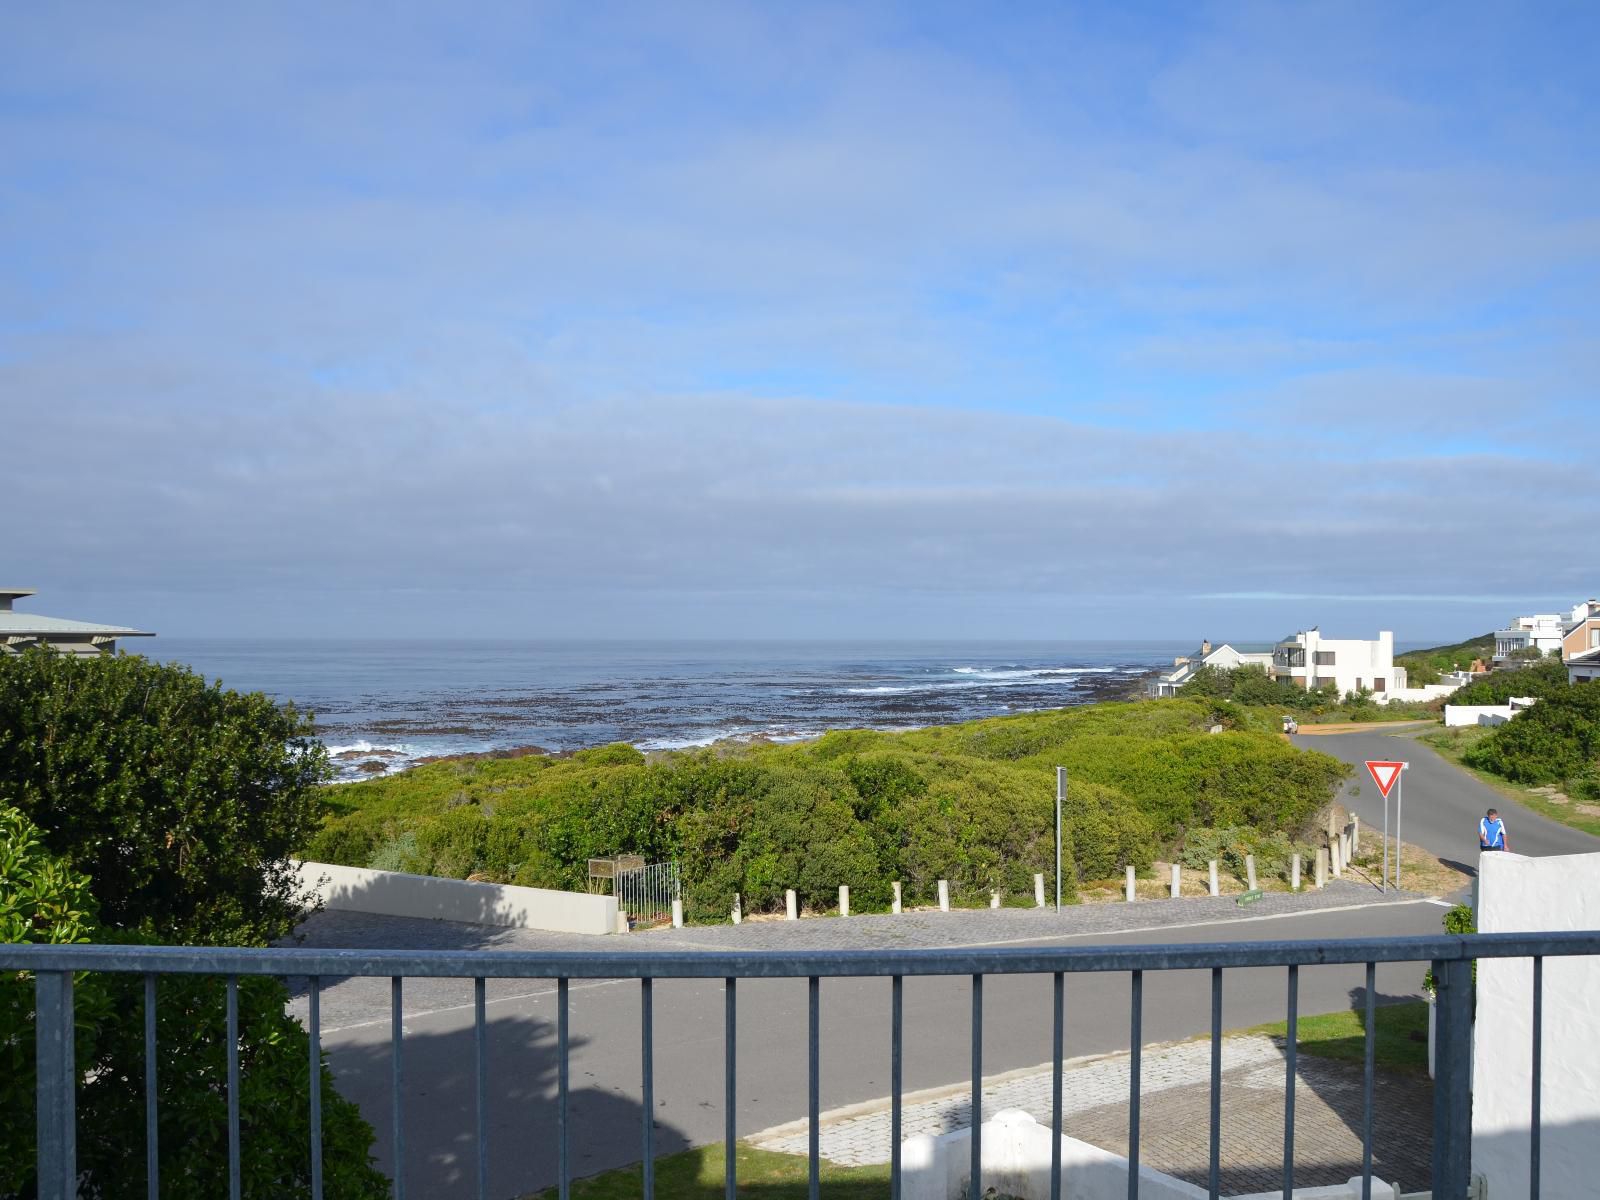 Hermanus Beach Villa And Cottages Vermont Za Hermanus Western Cape South Africa Beach, Nature, Sand, Tower, Building, Architecture